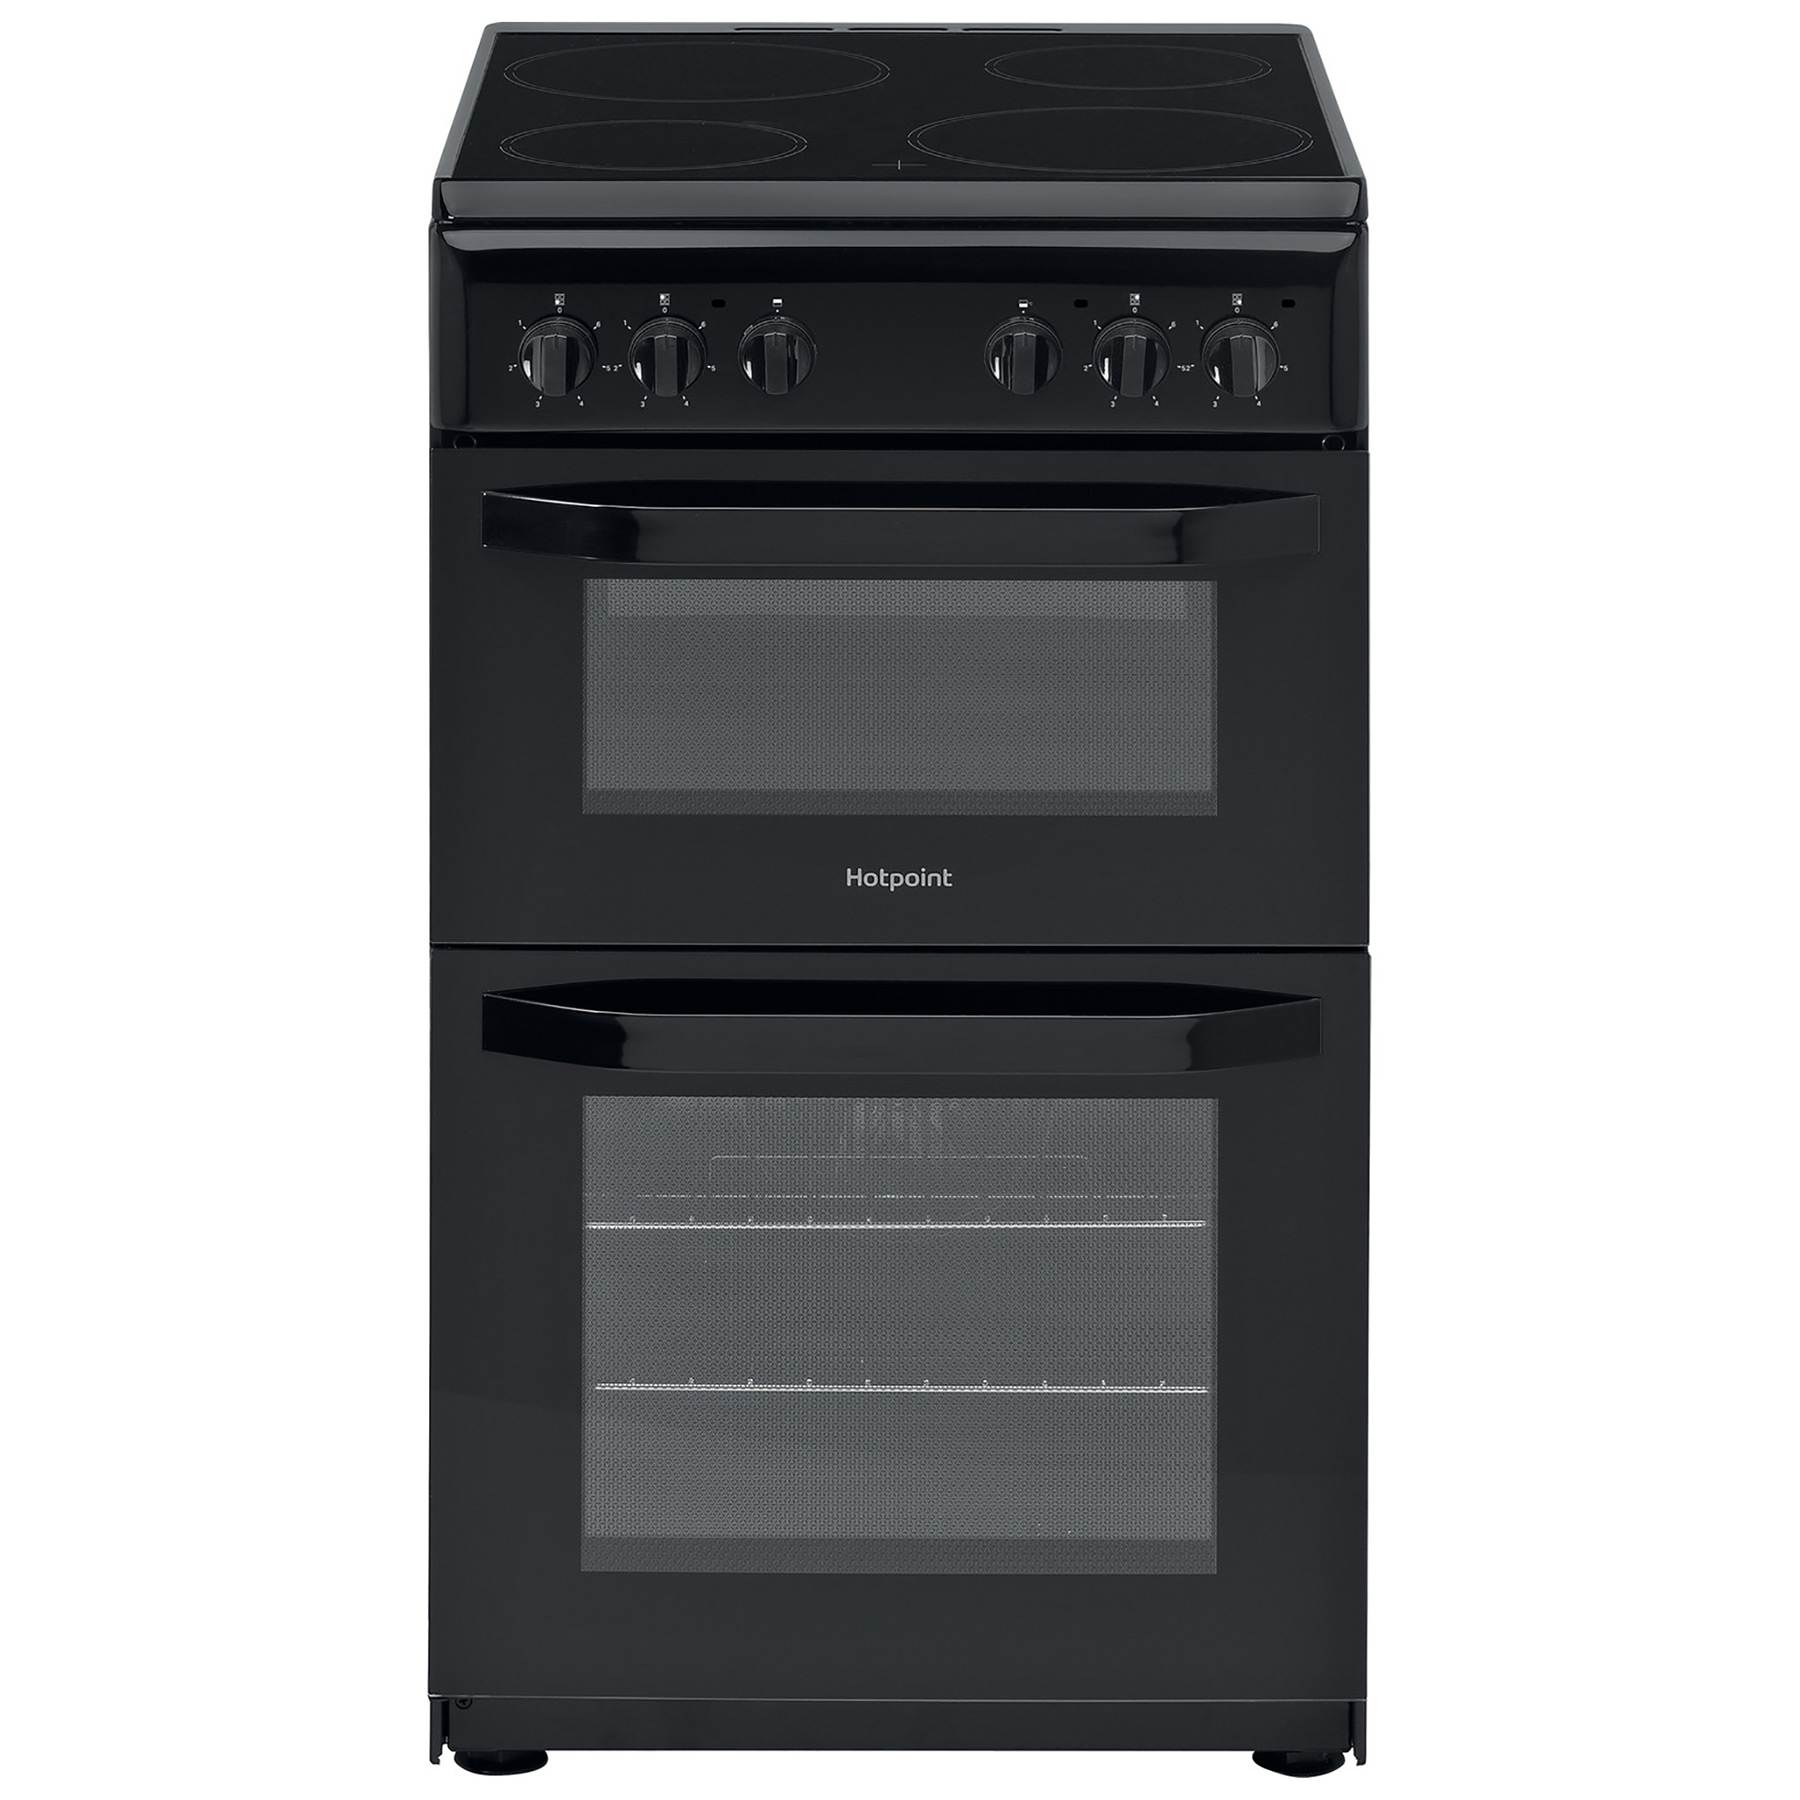 Hotpoint HD5V92KCB 50cm Twin Cavity Electric Cooker in Black Ceramic H